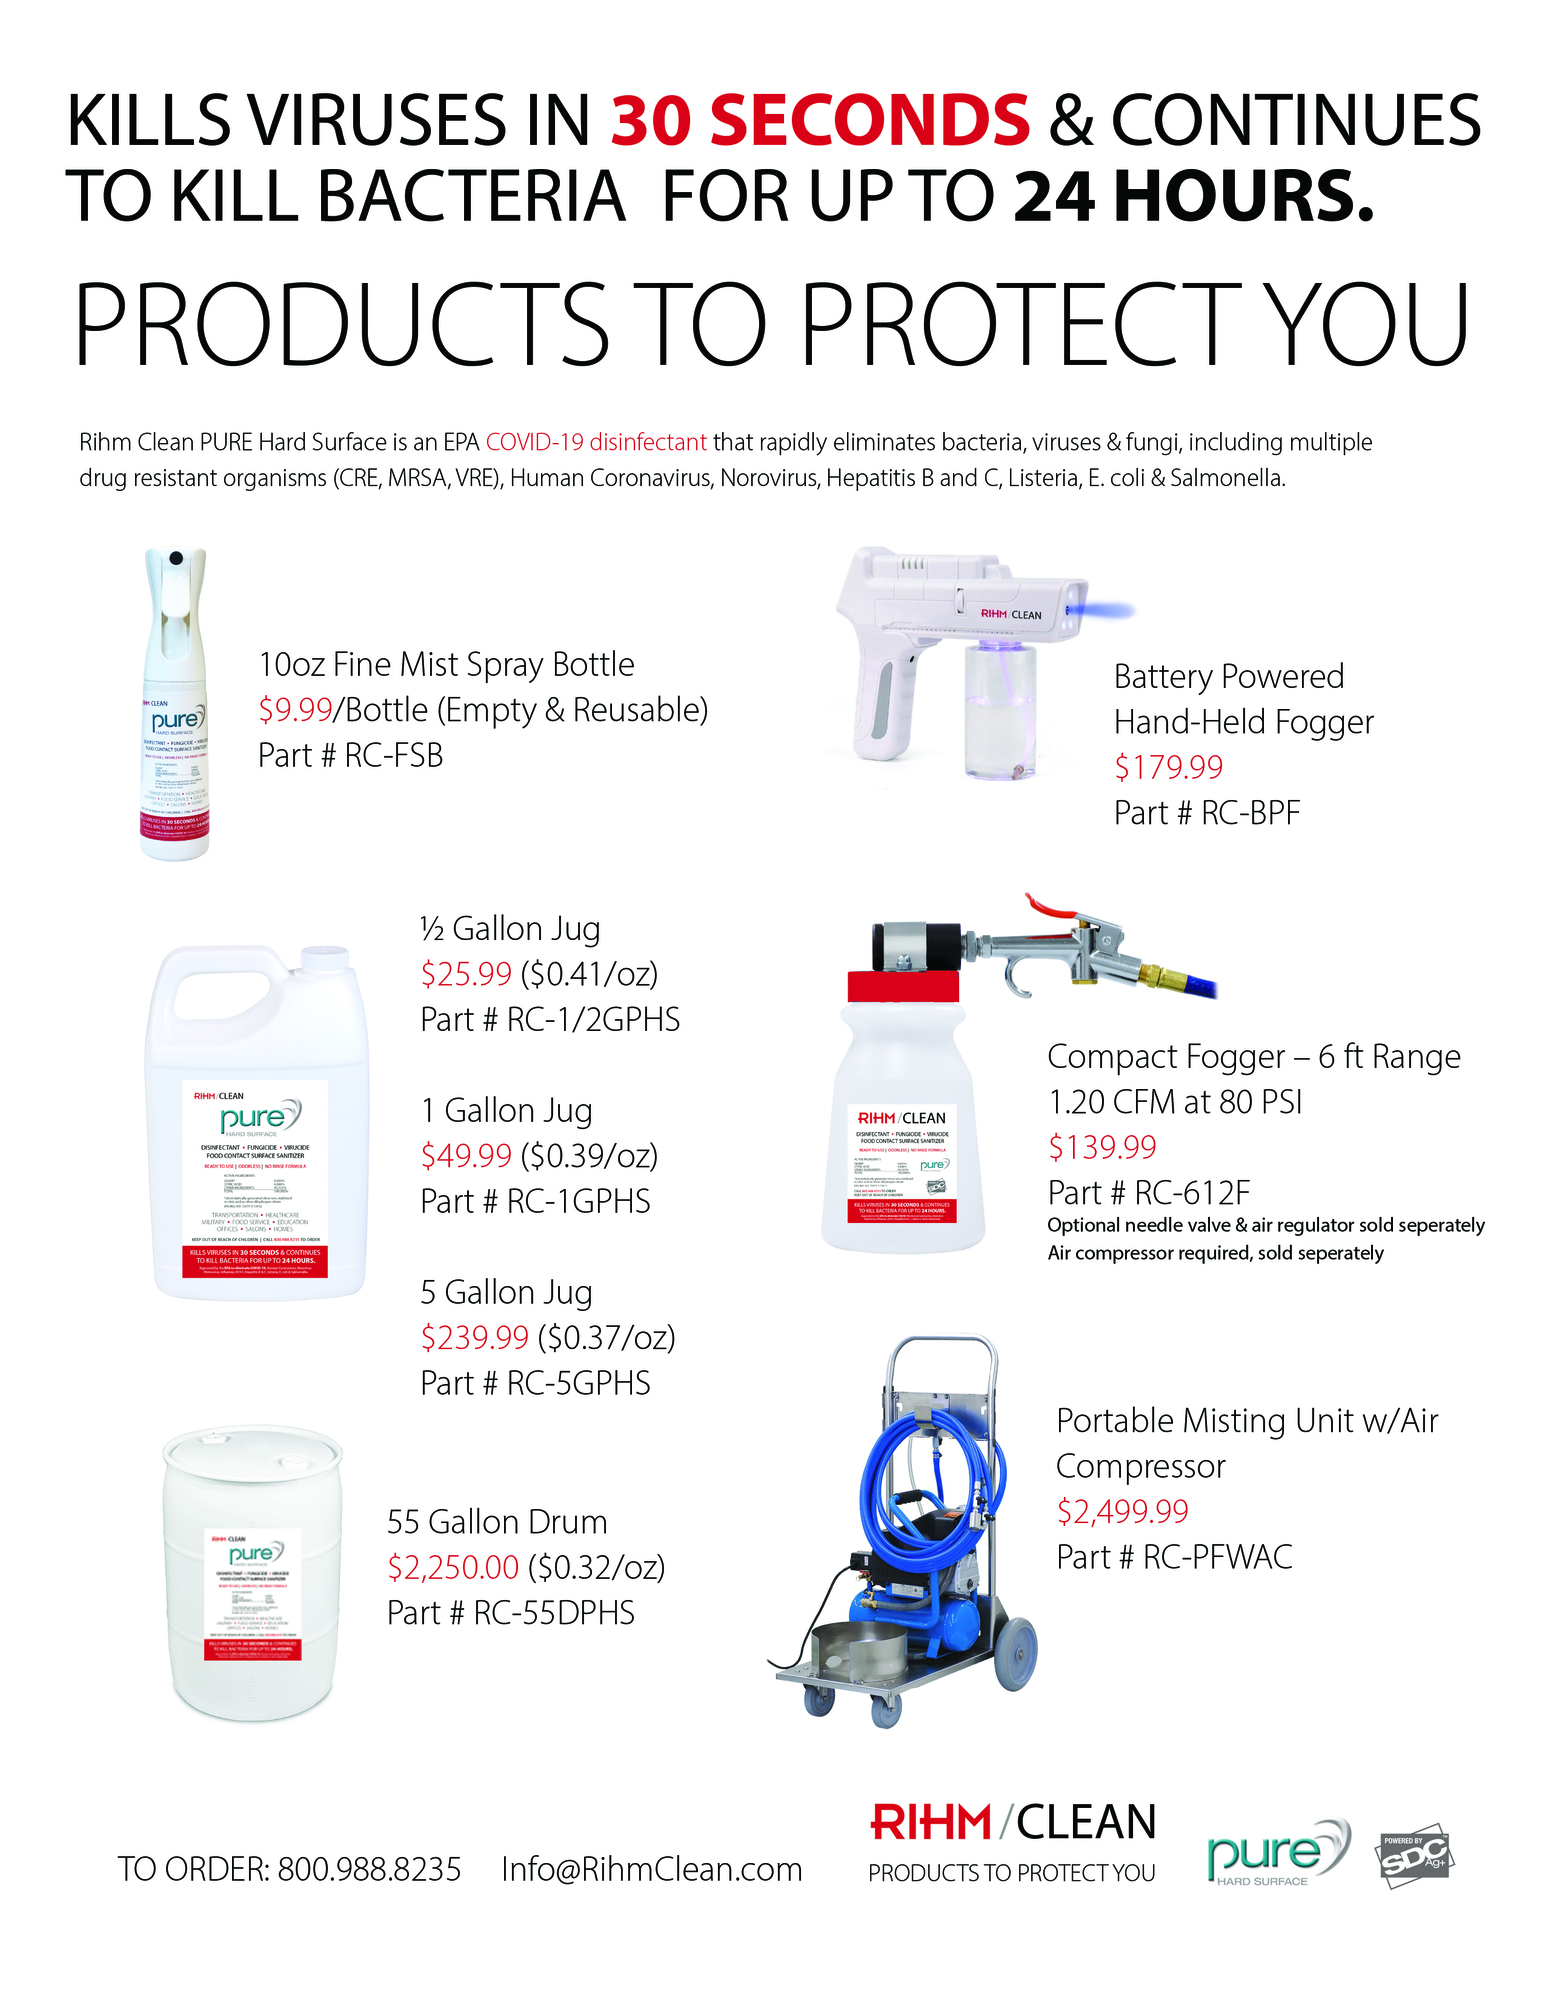 COVID19 Sanitizer Kills Viruses and Bacteria Products from Rihm Kenworth Rihm Clean